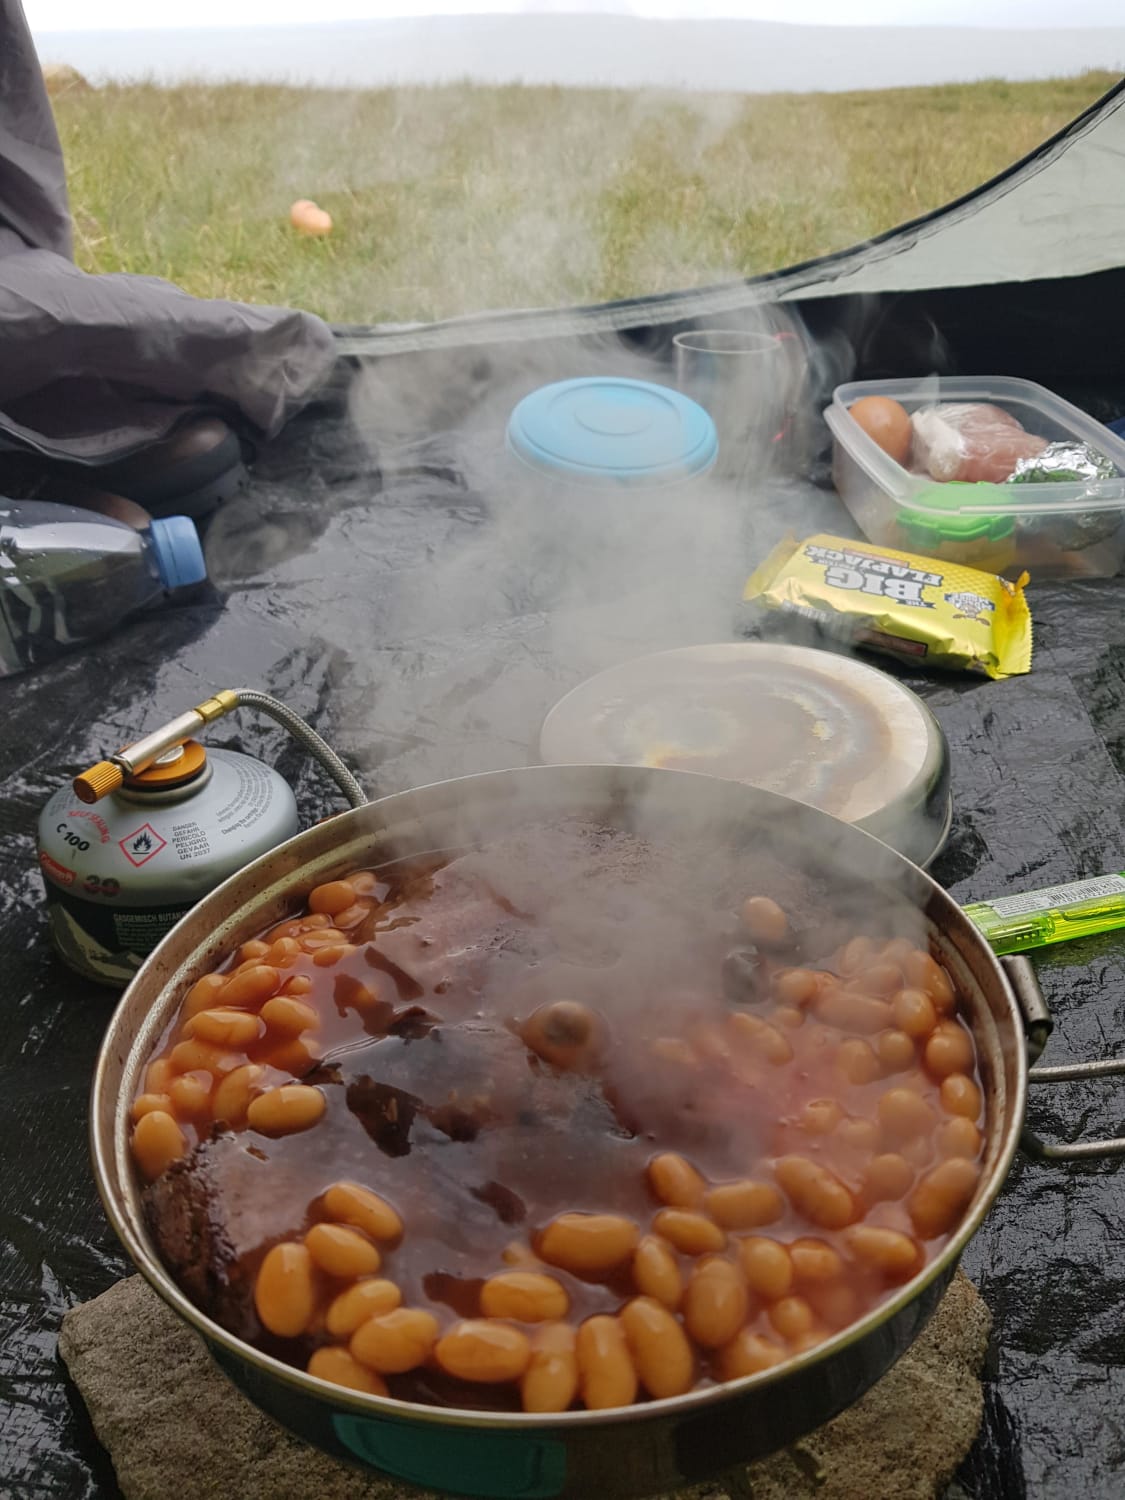 Yorkshire Dales National Park Fillet Steaks & Beans with Tabasco Sauce. Sleeping in Coleman Darwin 2, East of Pen-y-Gent